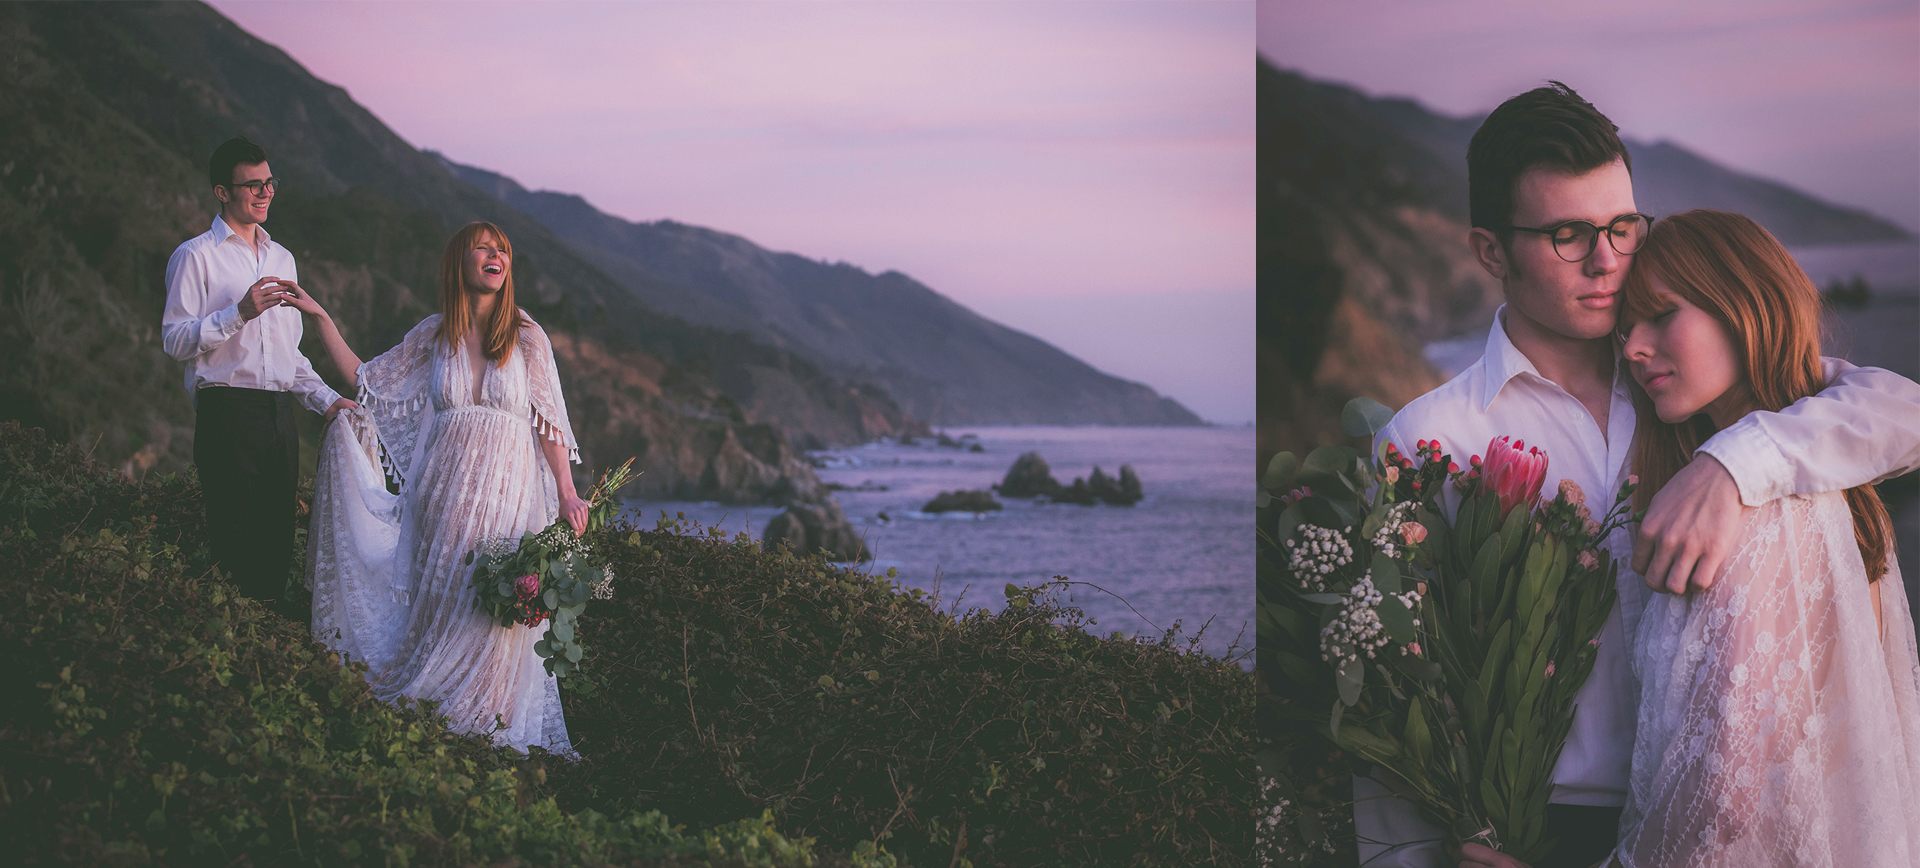 Big Sur Elopement package - Sunset & blue hour wedding photos at the beach in California